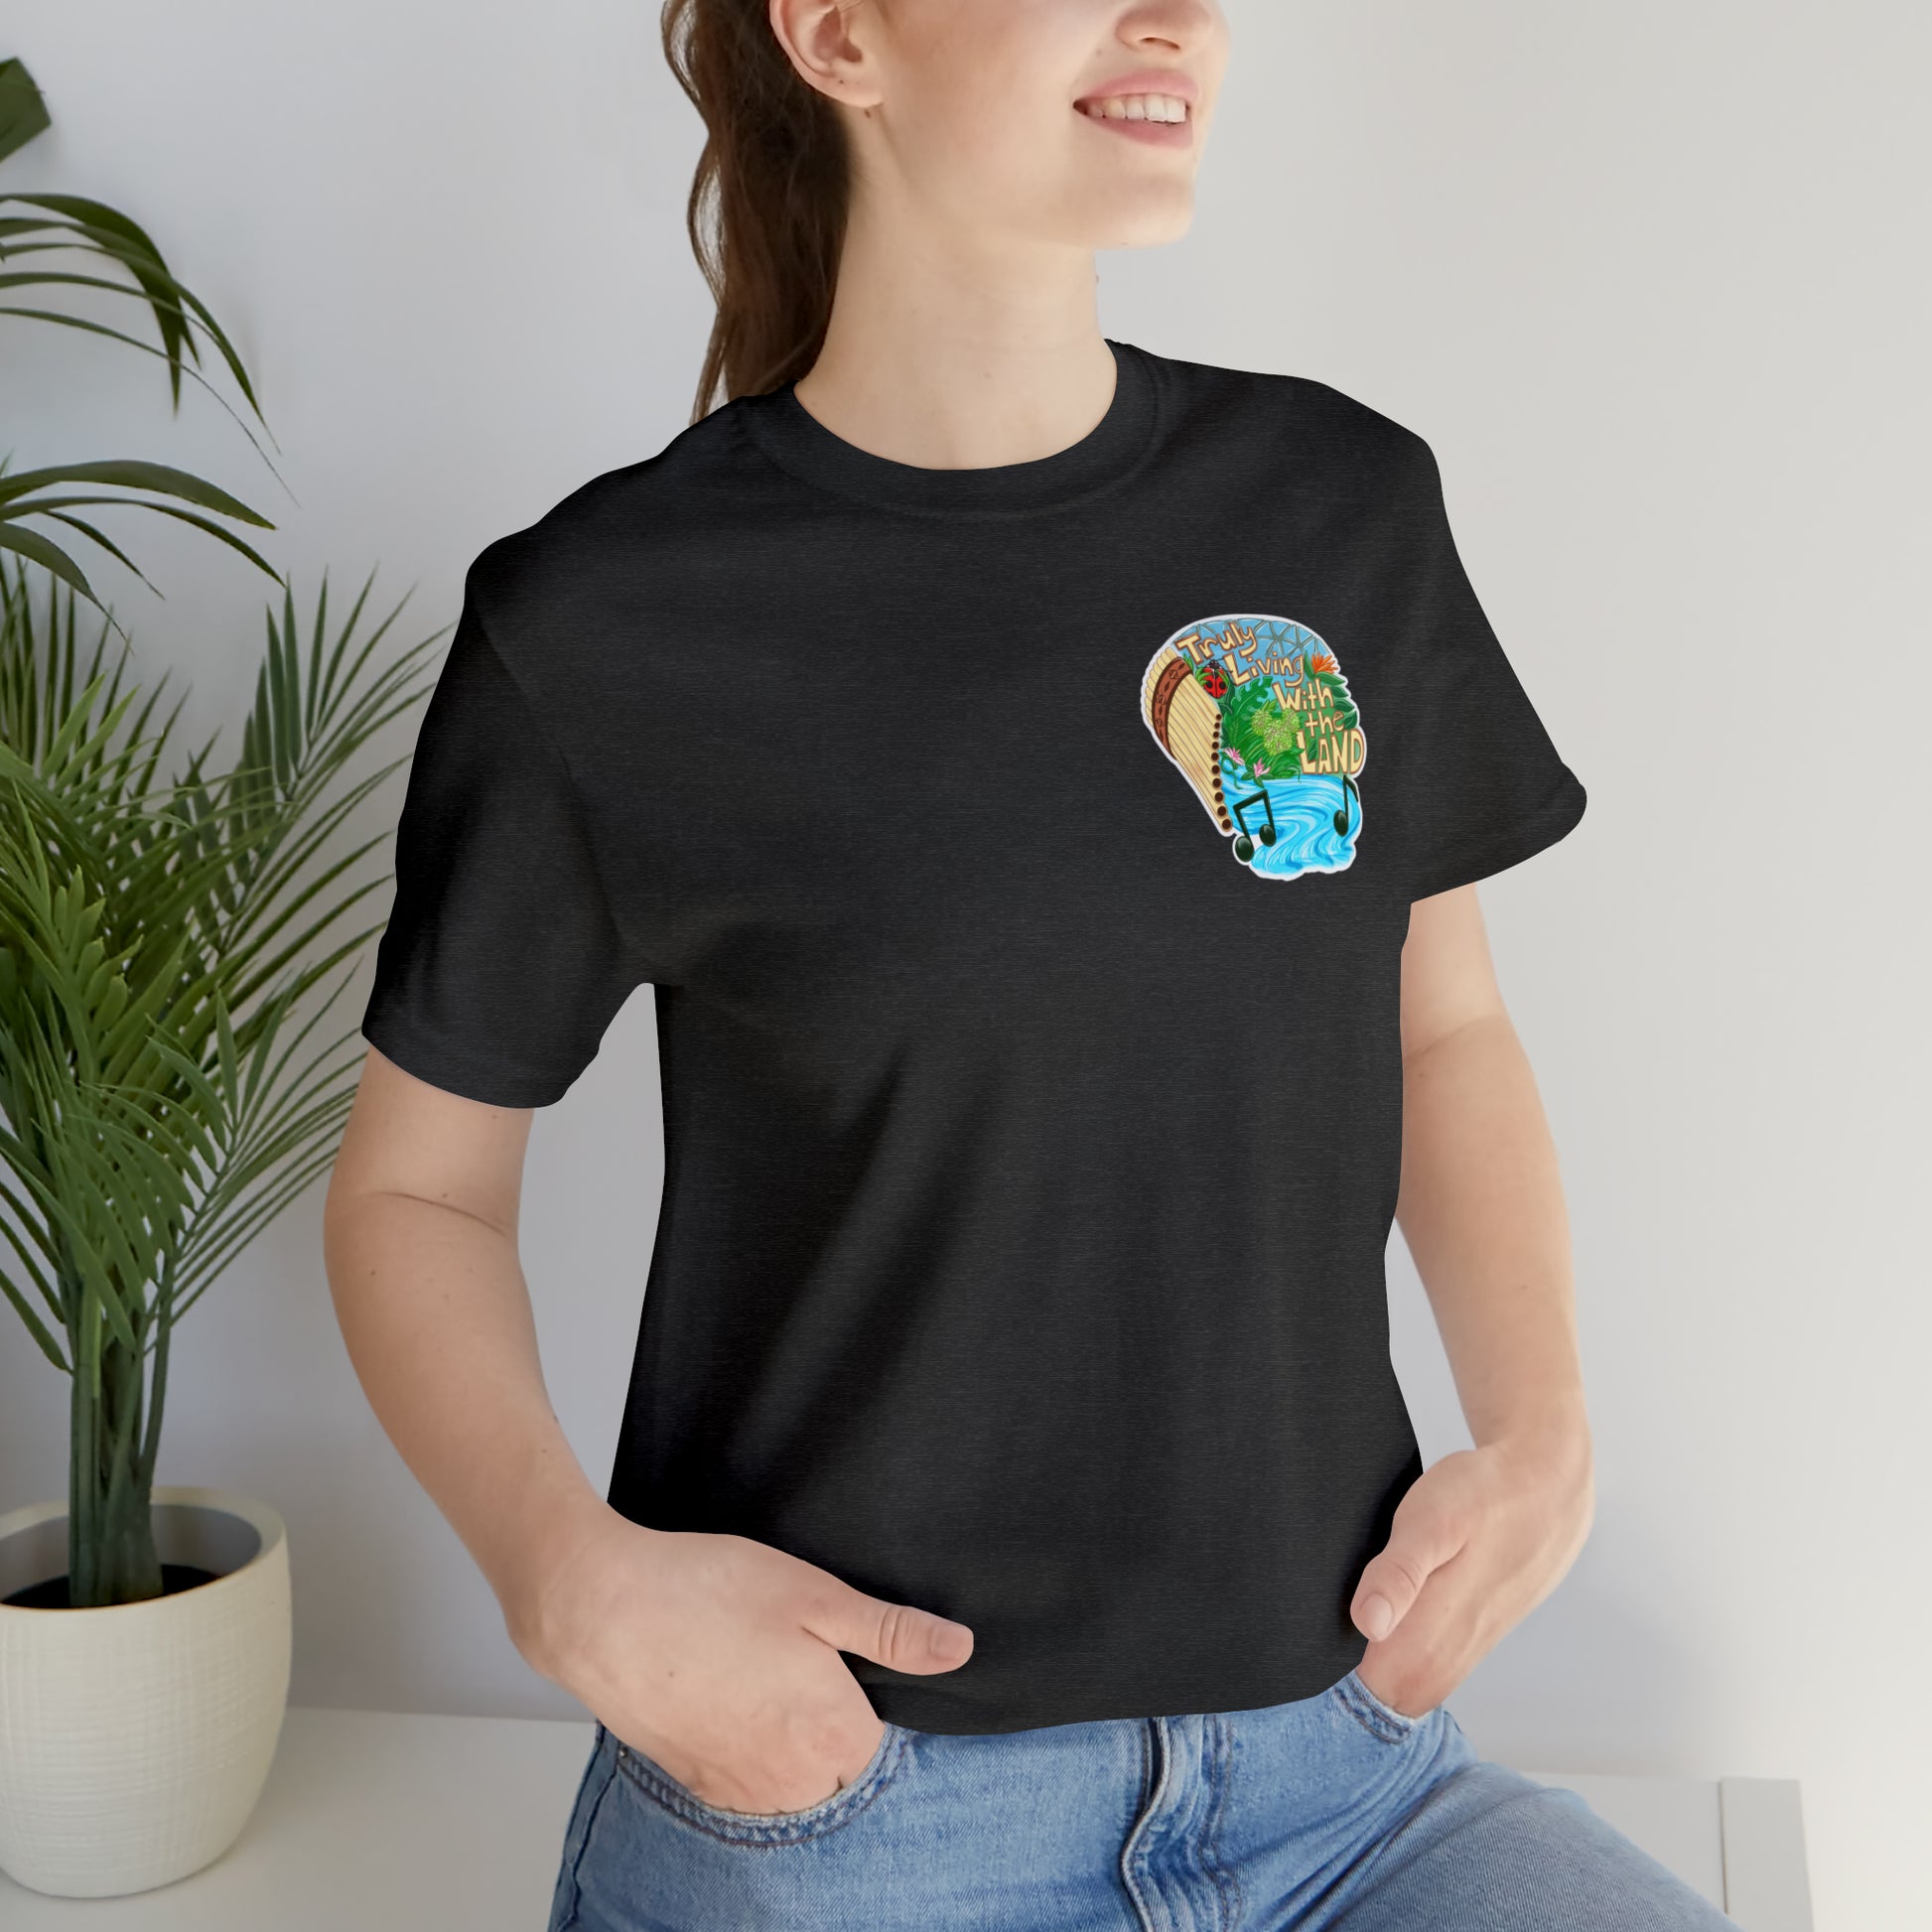 Lifestyle living with the land tee